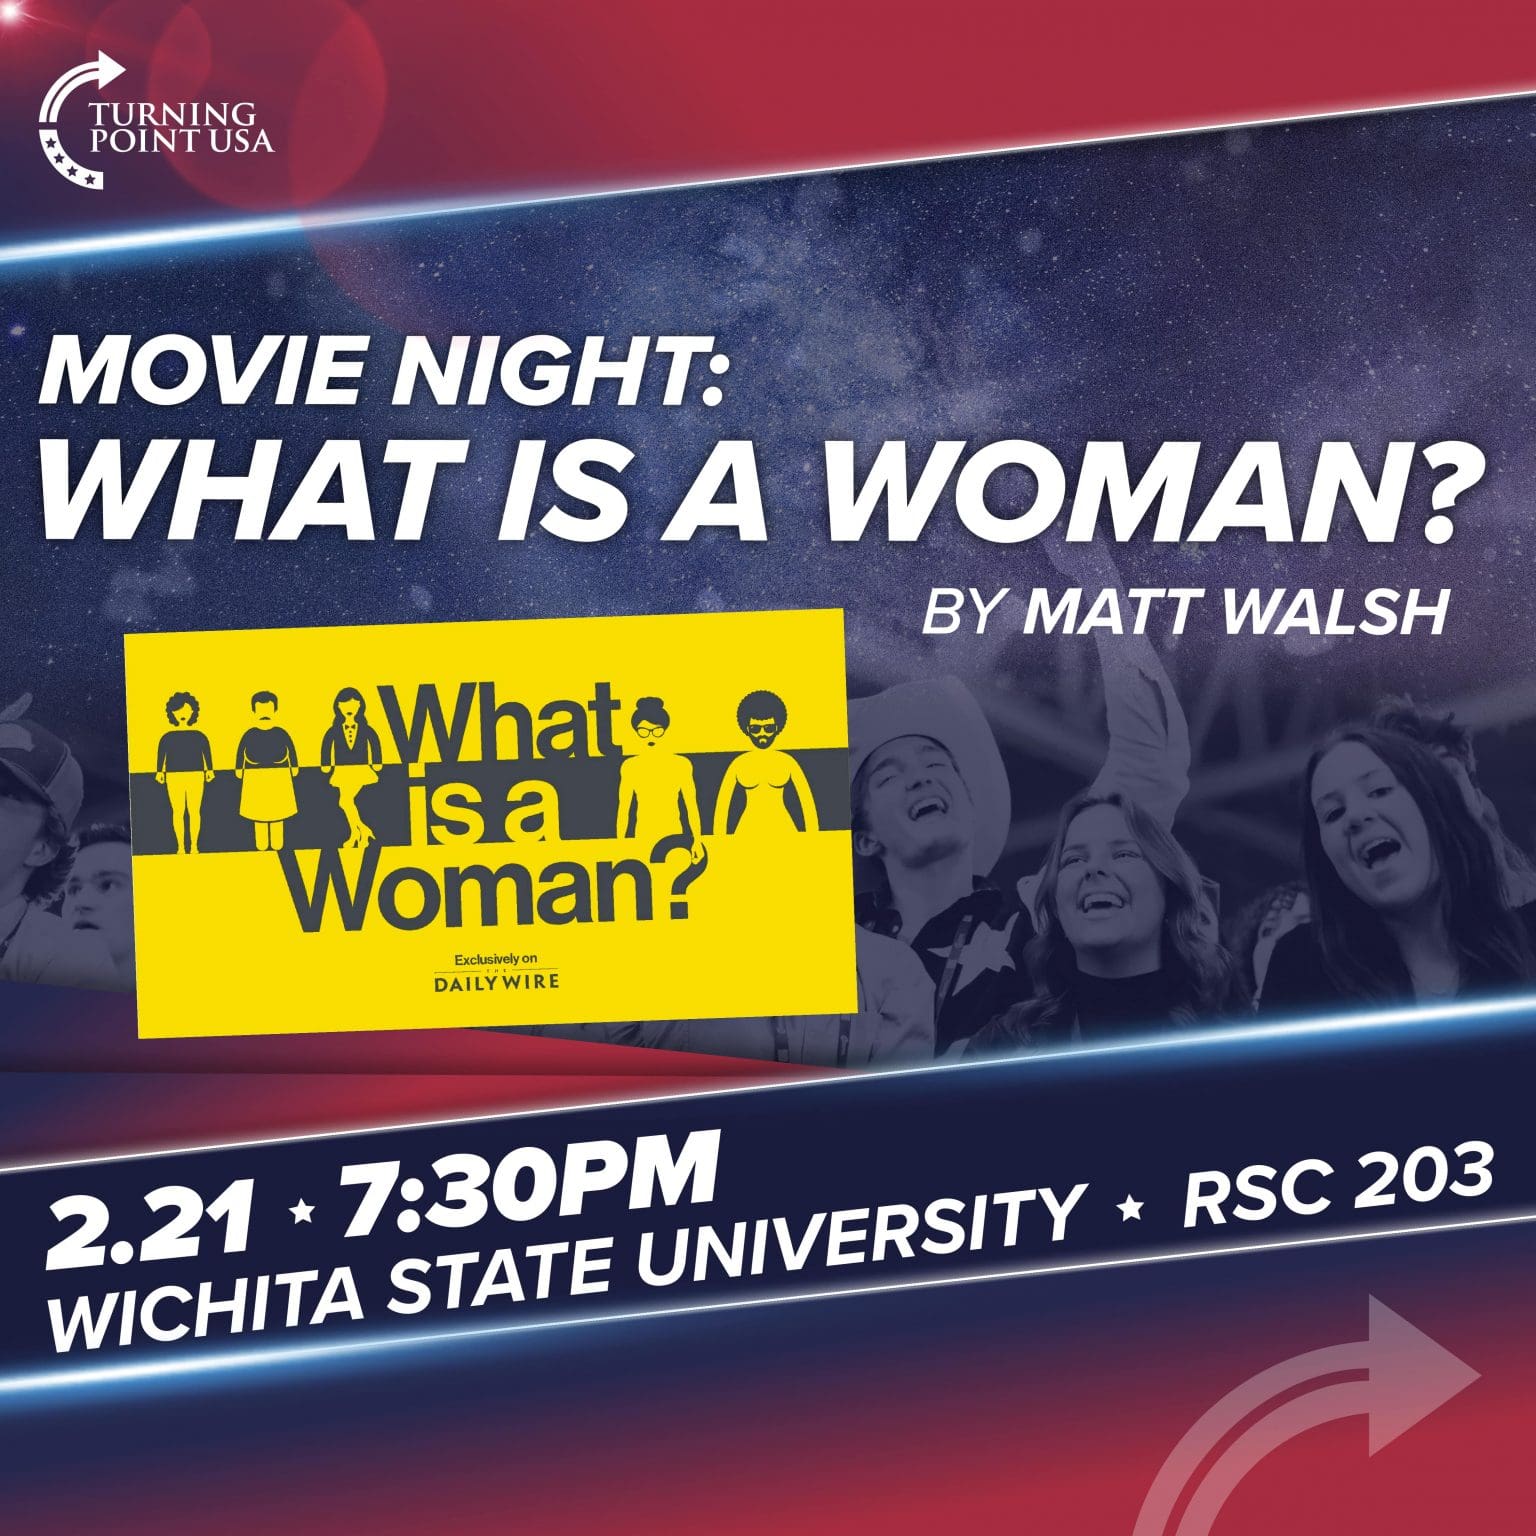 Movie Night: What is a Woman? By Matt Walsh. 